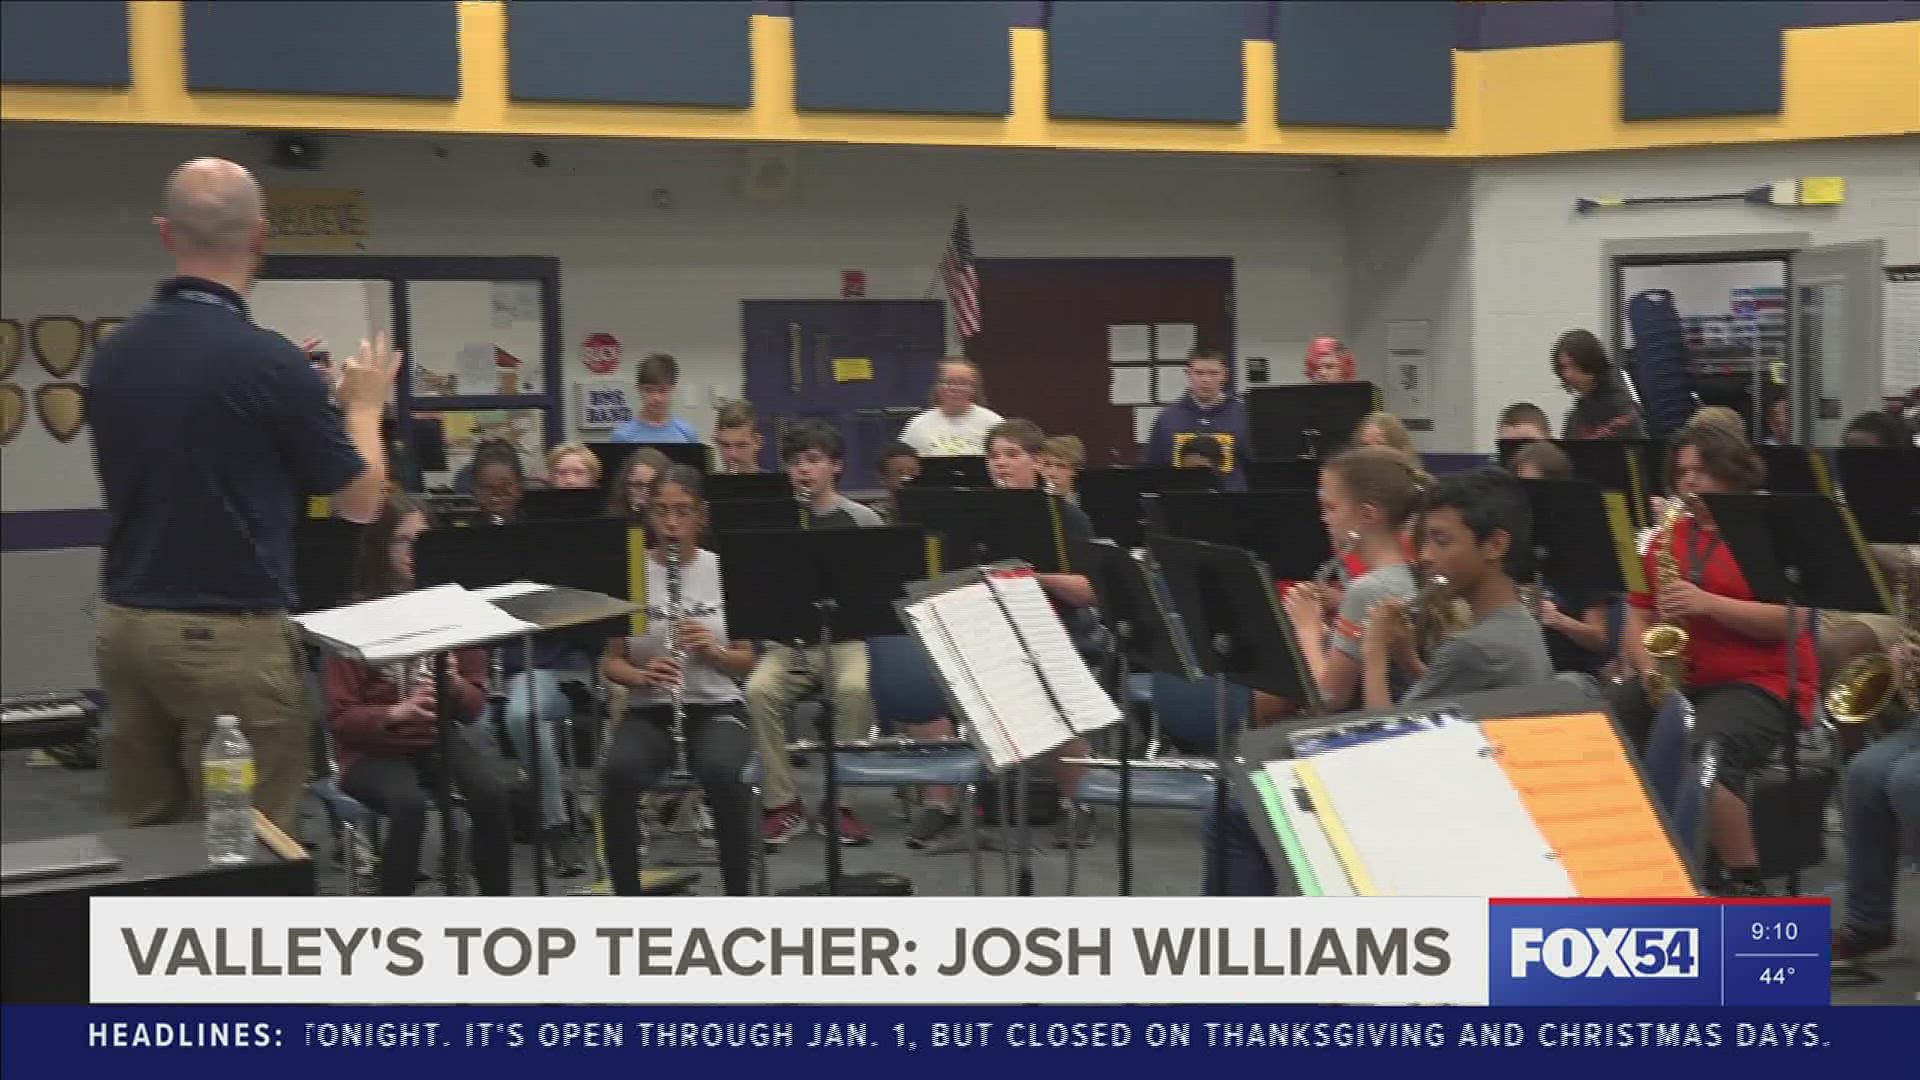 We know how music unites us! And one band director from Buckhorn Middle School's goal - is harmony… Both literally and figuratively among his students.